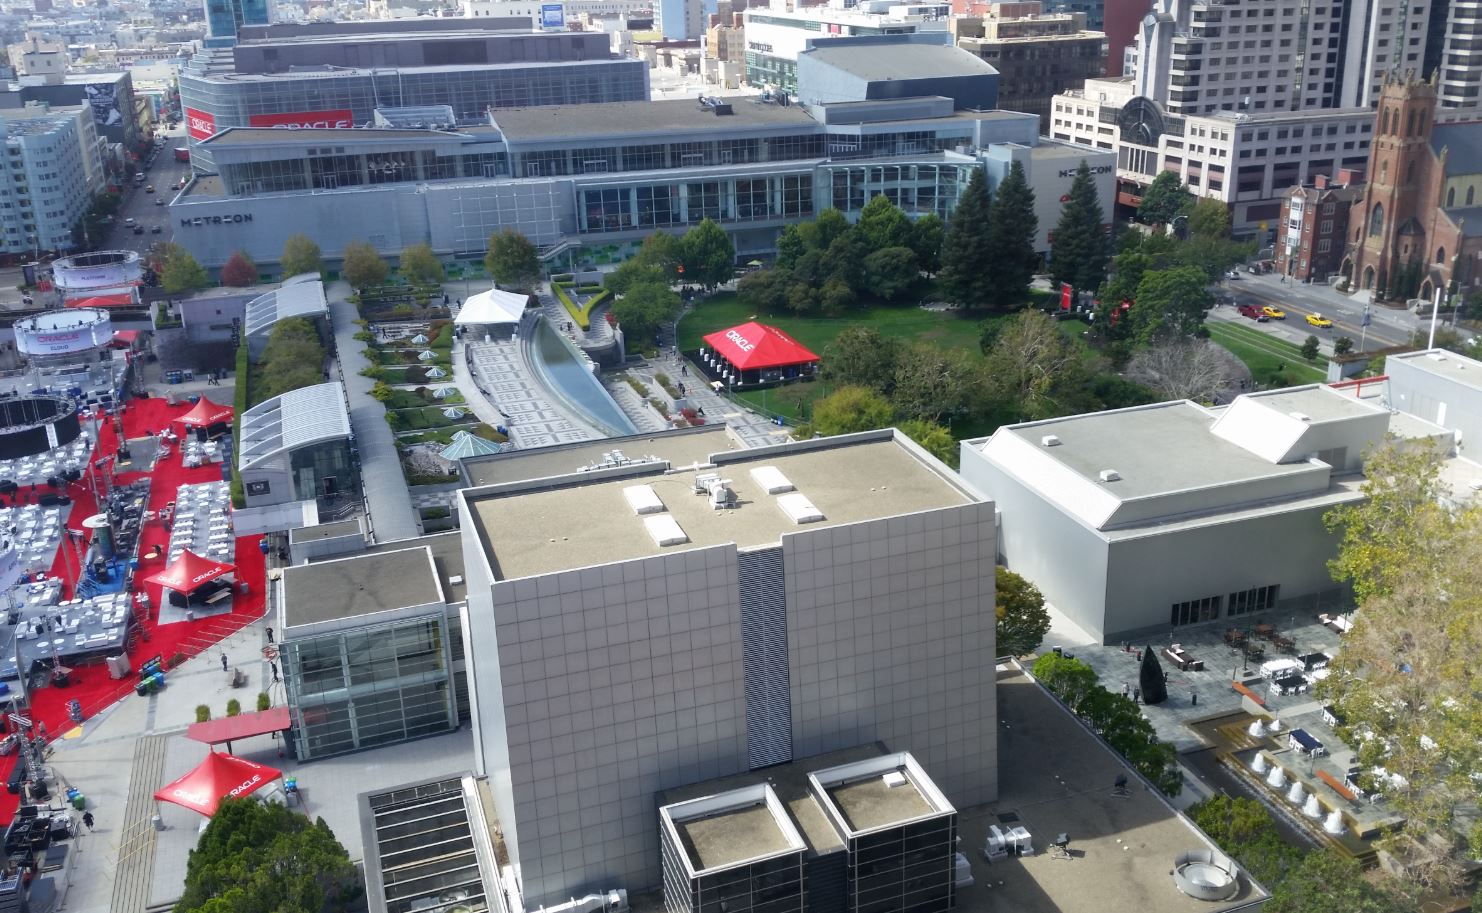 2014 Oracle OpenWorld view from our building's right side.